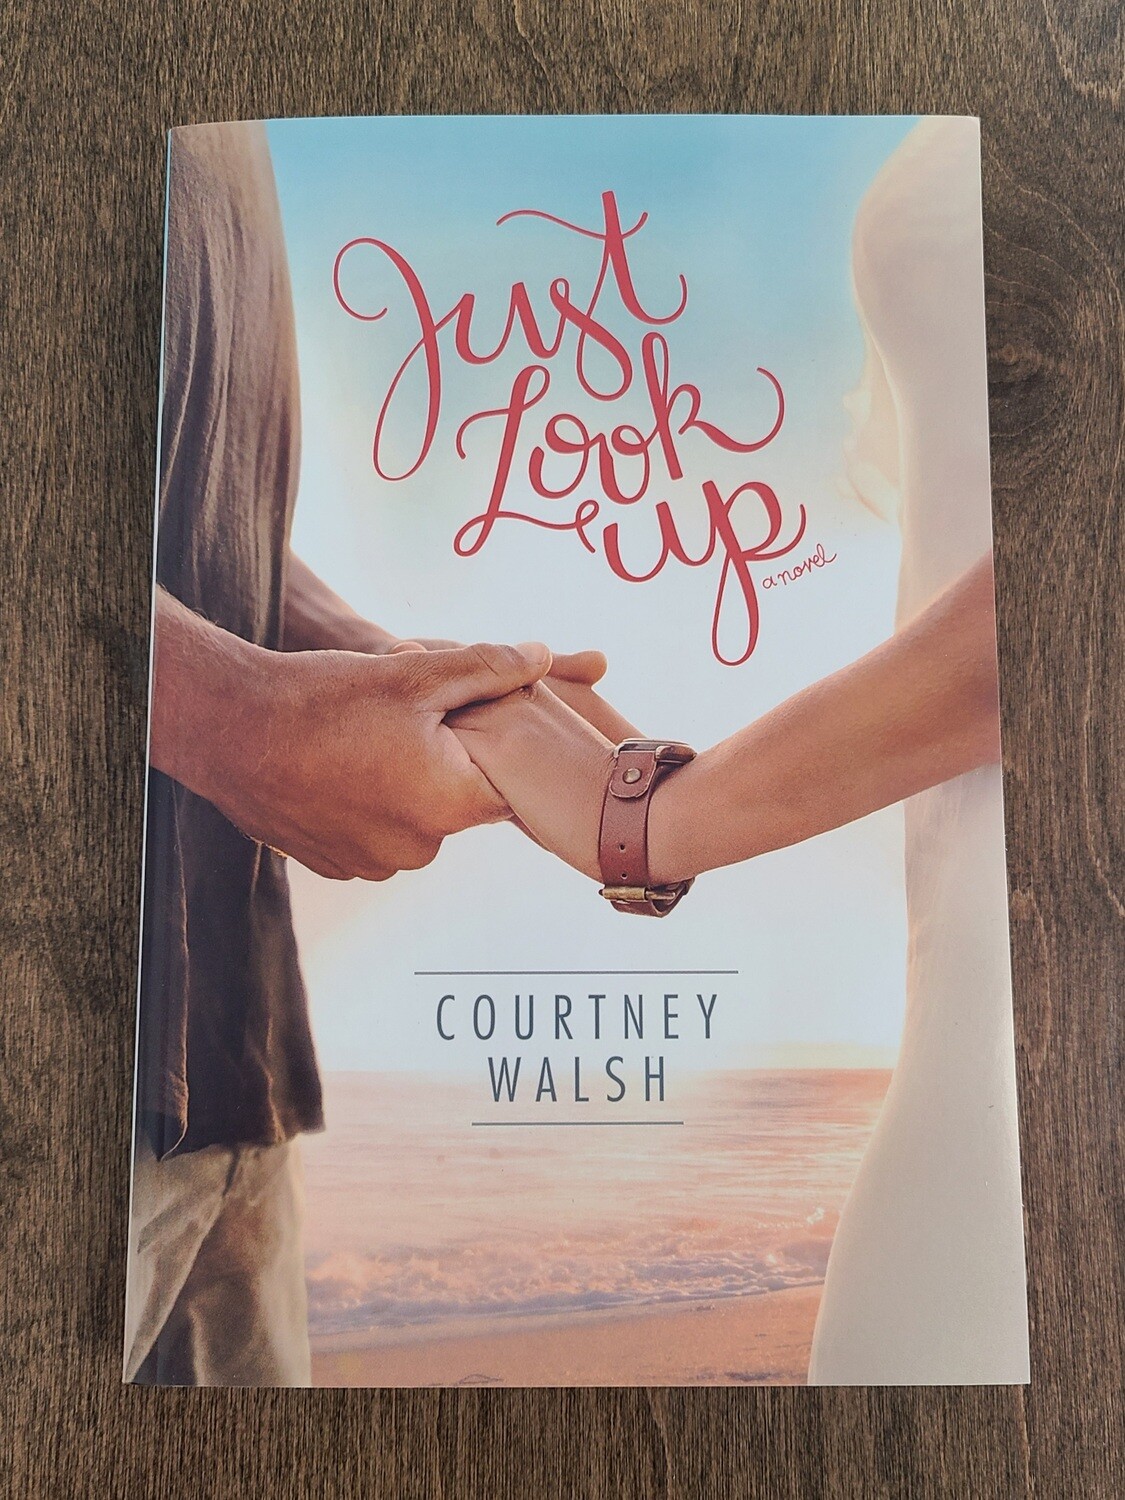 Just Look Up by Courtney Walsh